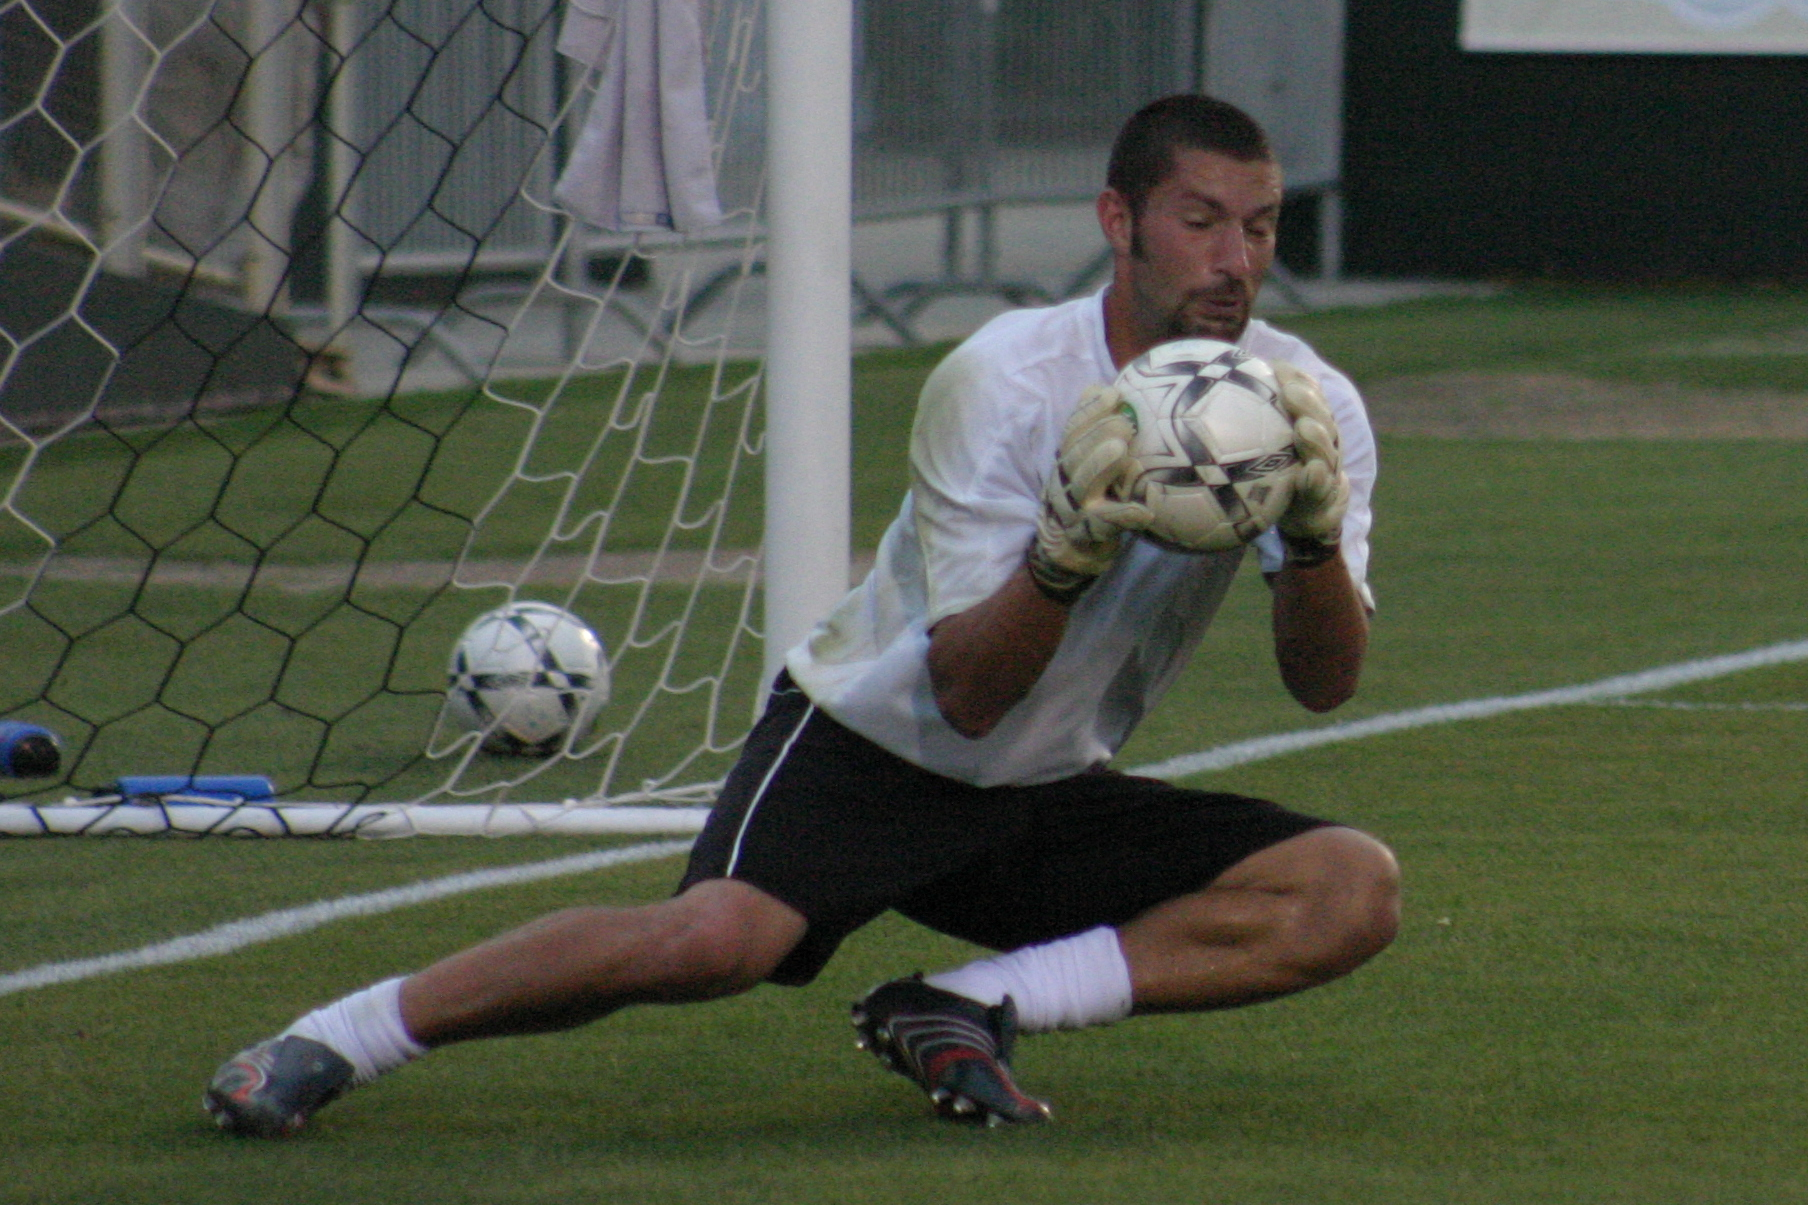 there is a male soccer player reaching out to save the ball